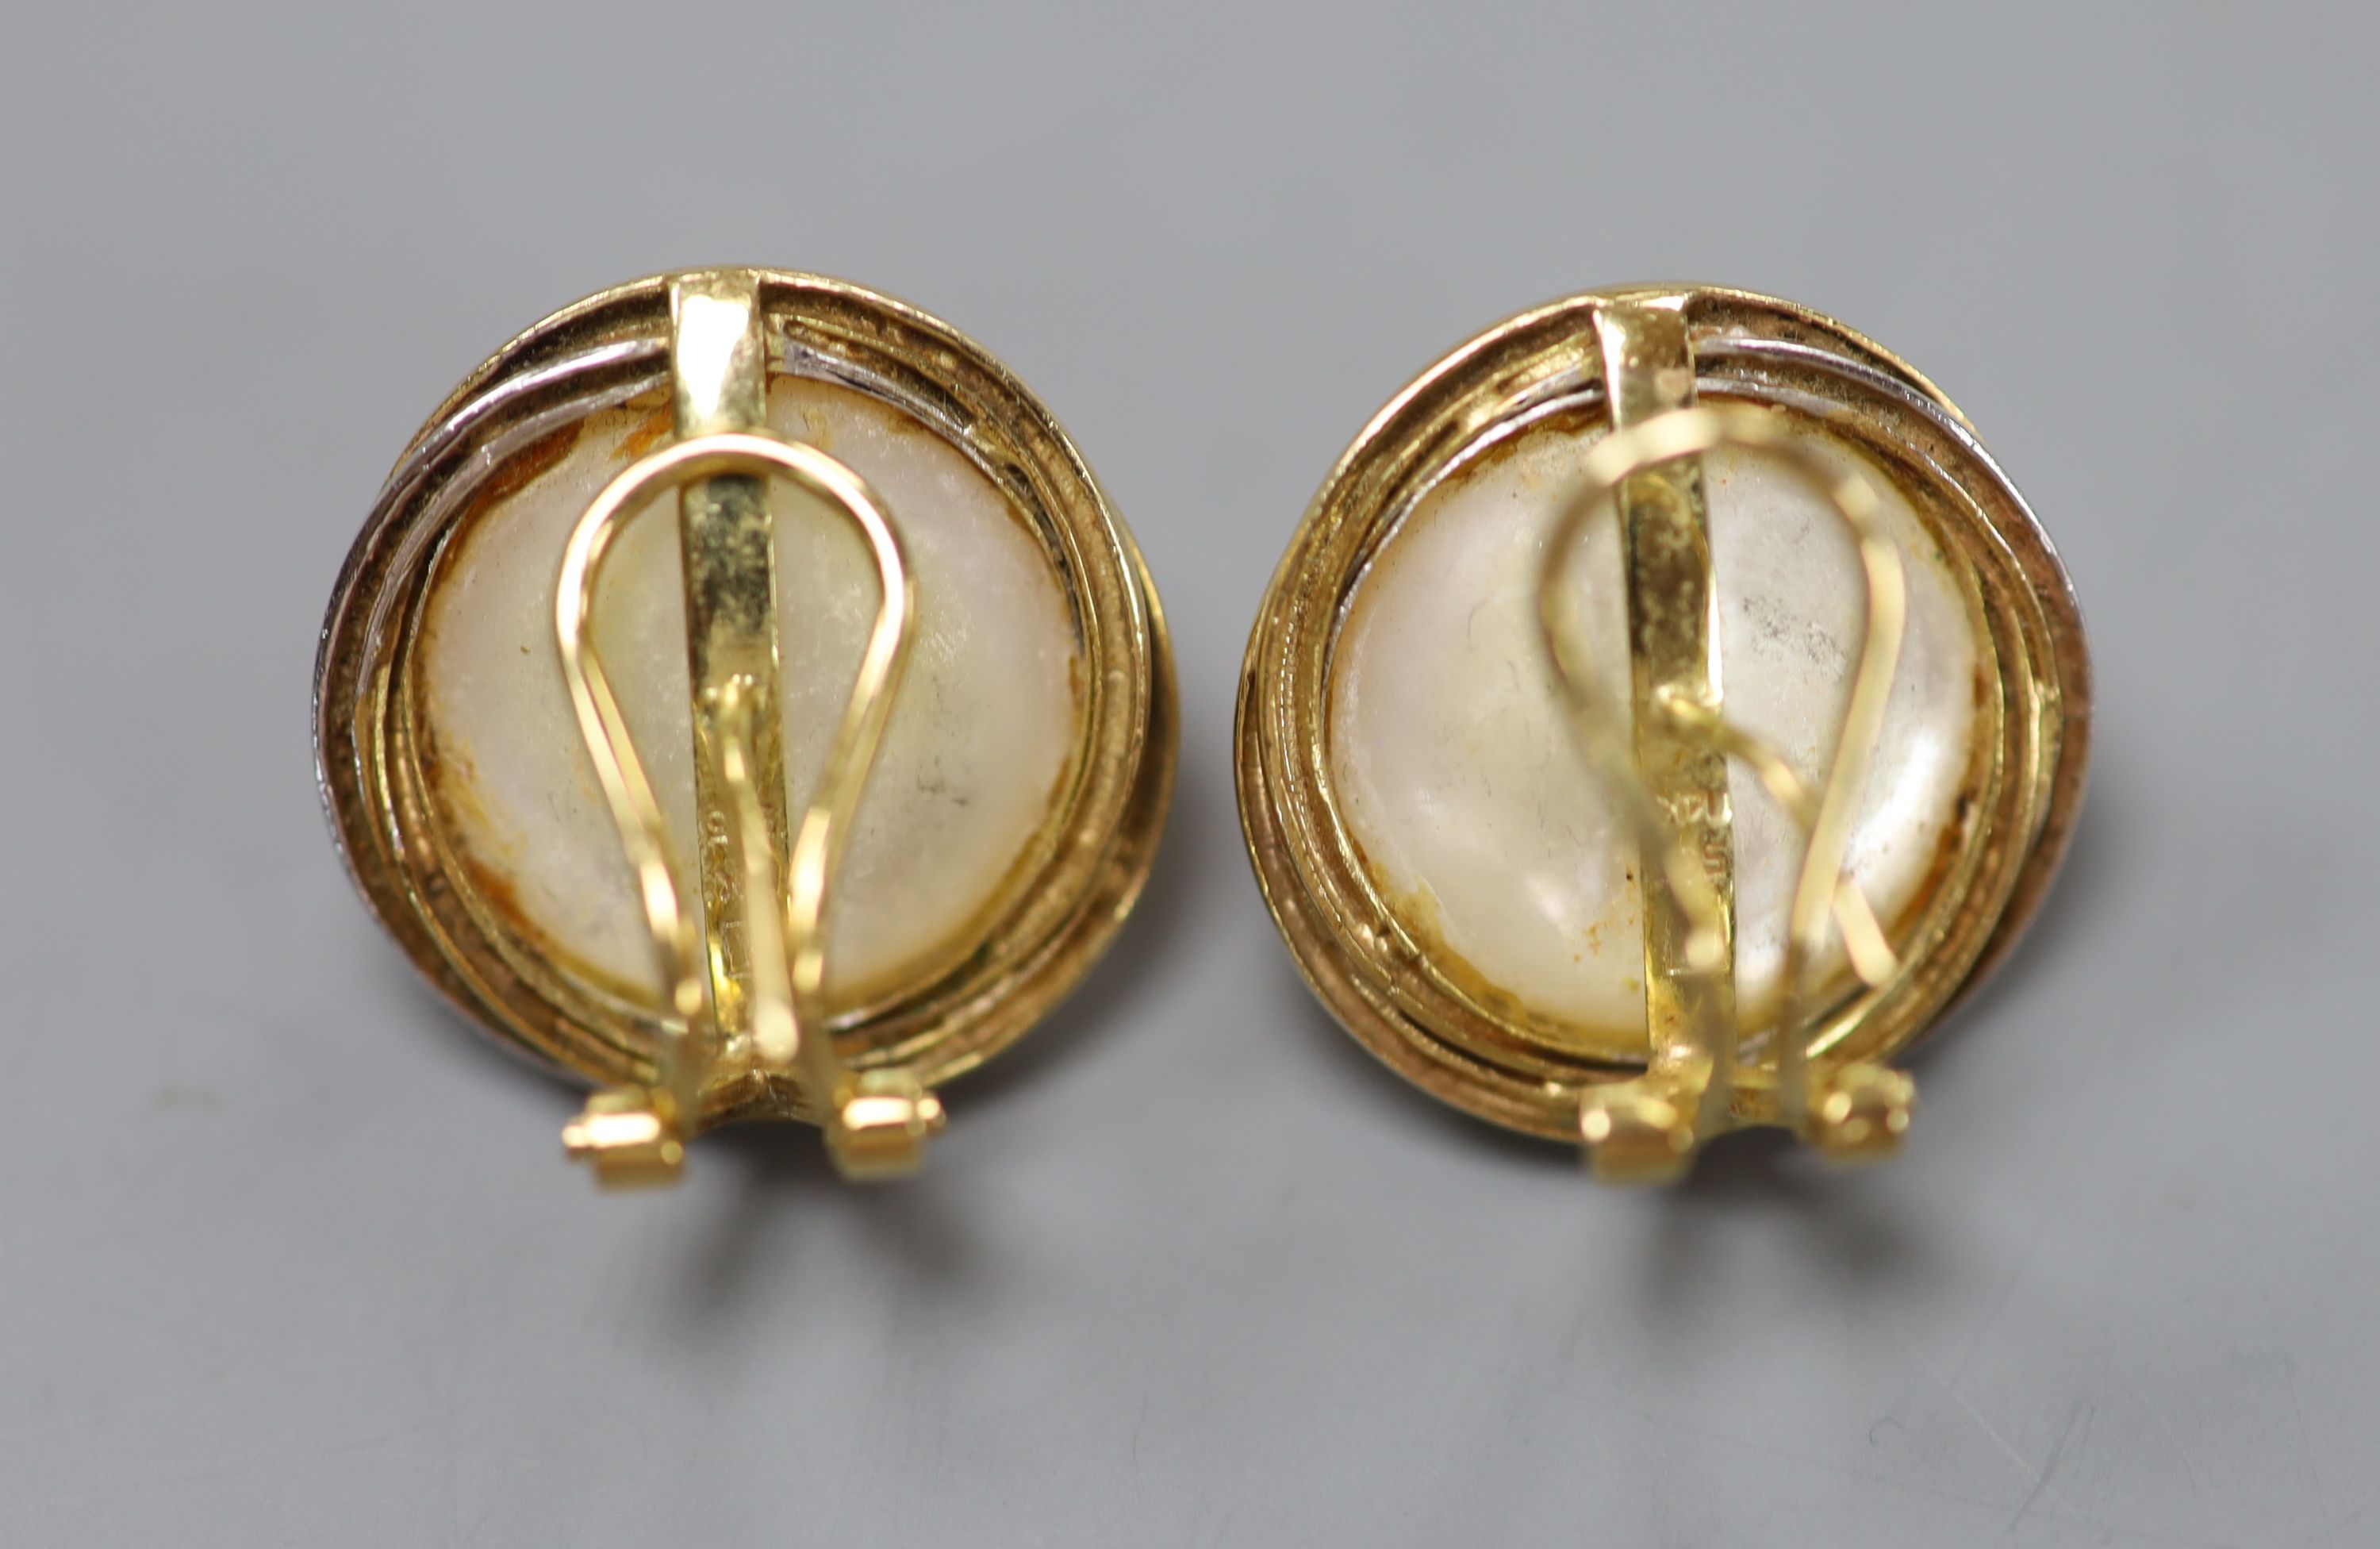 A modern pair of 14k yellow metal and mabe pearl ear clips, diameter 20mm, gross 12.5 grams